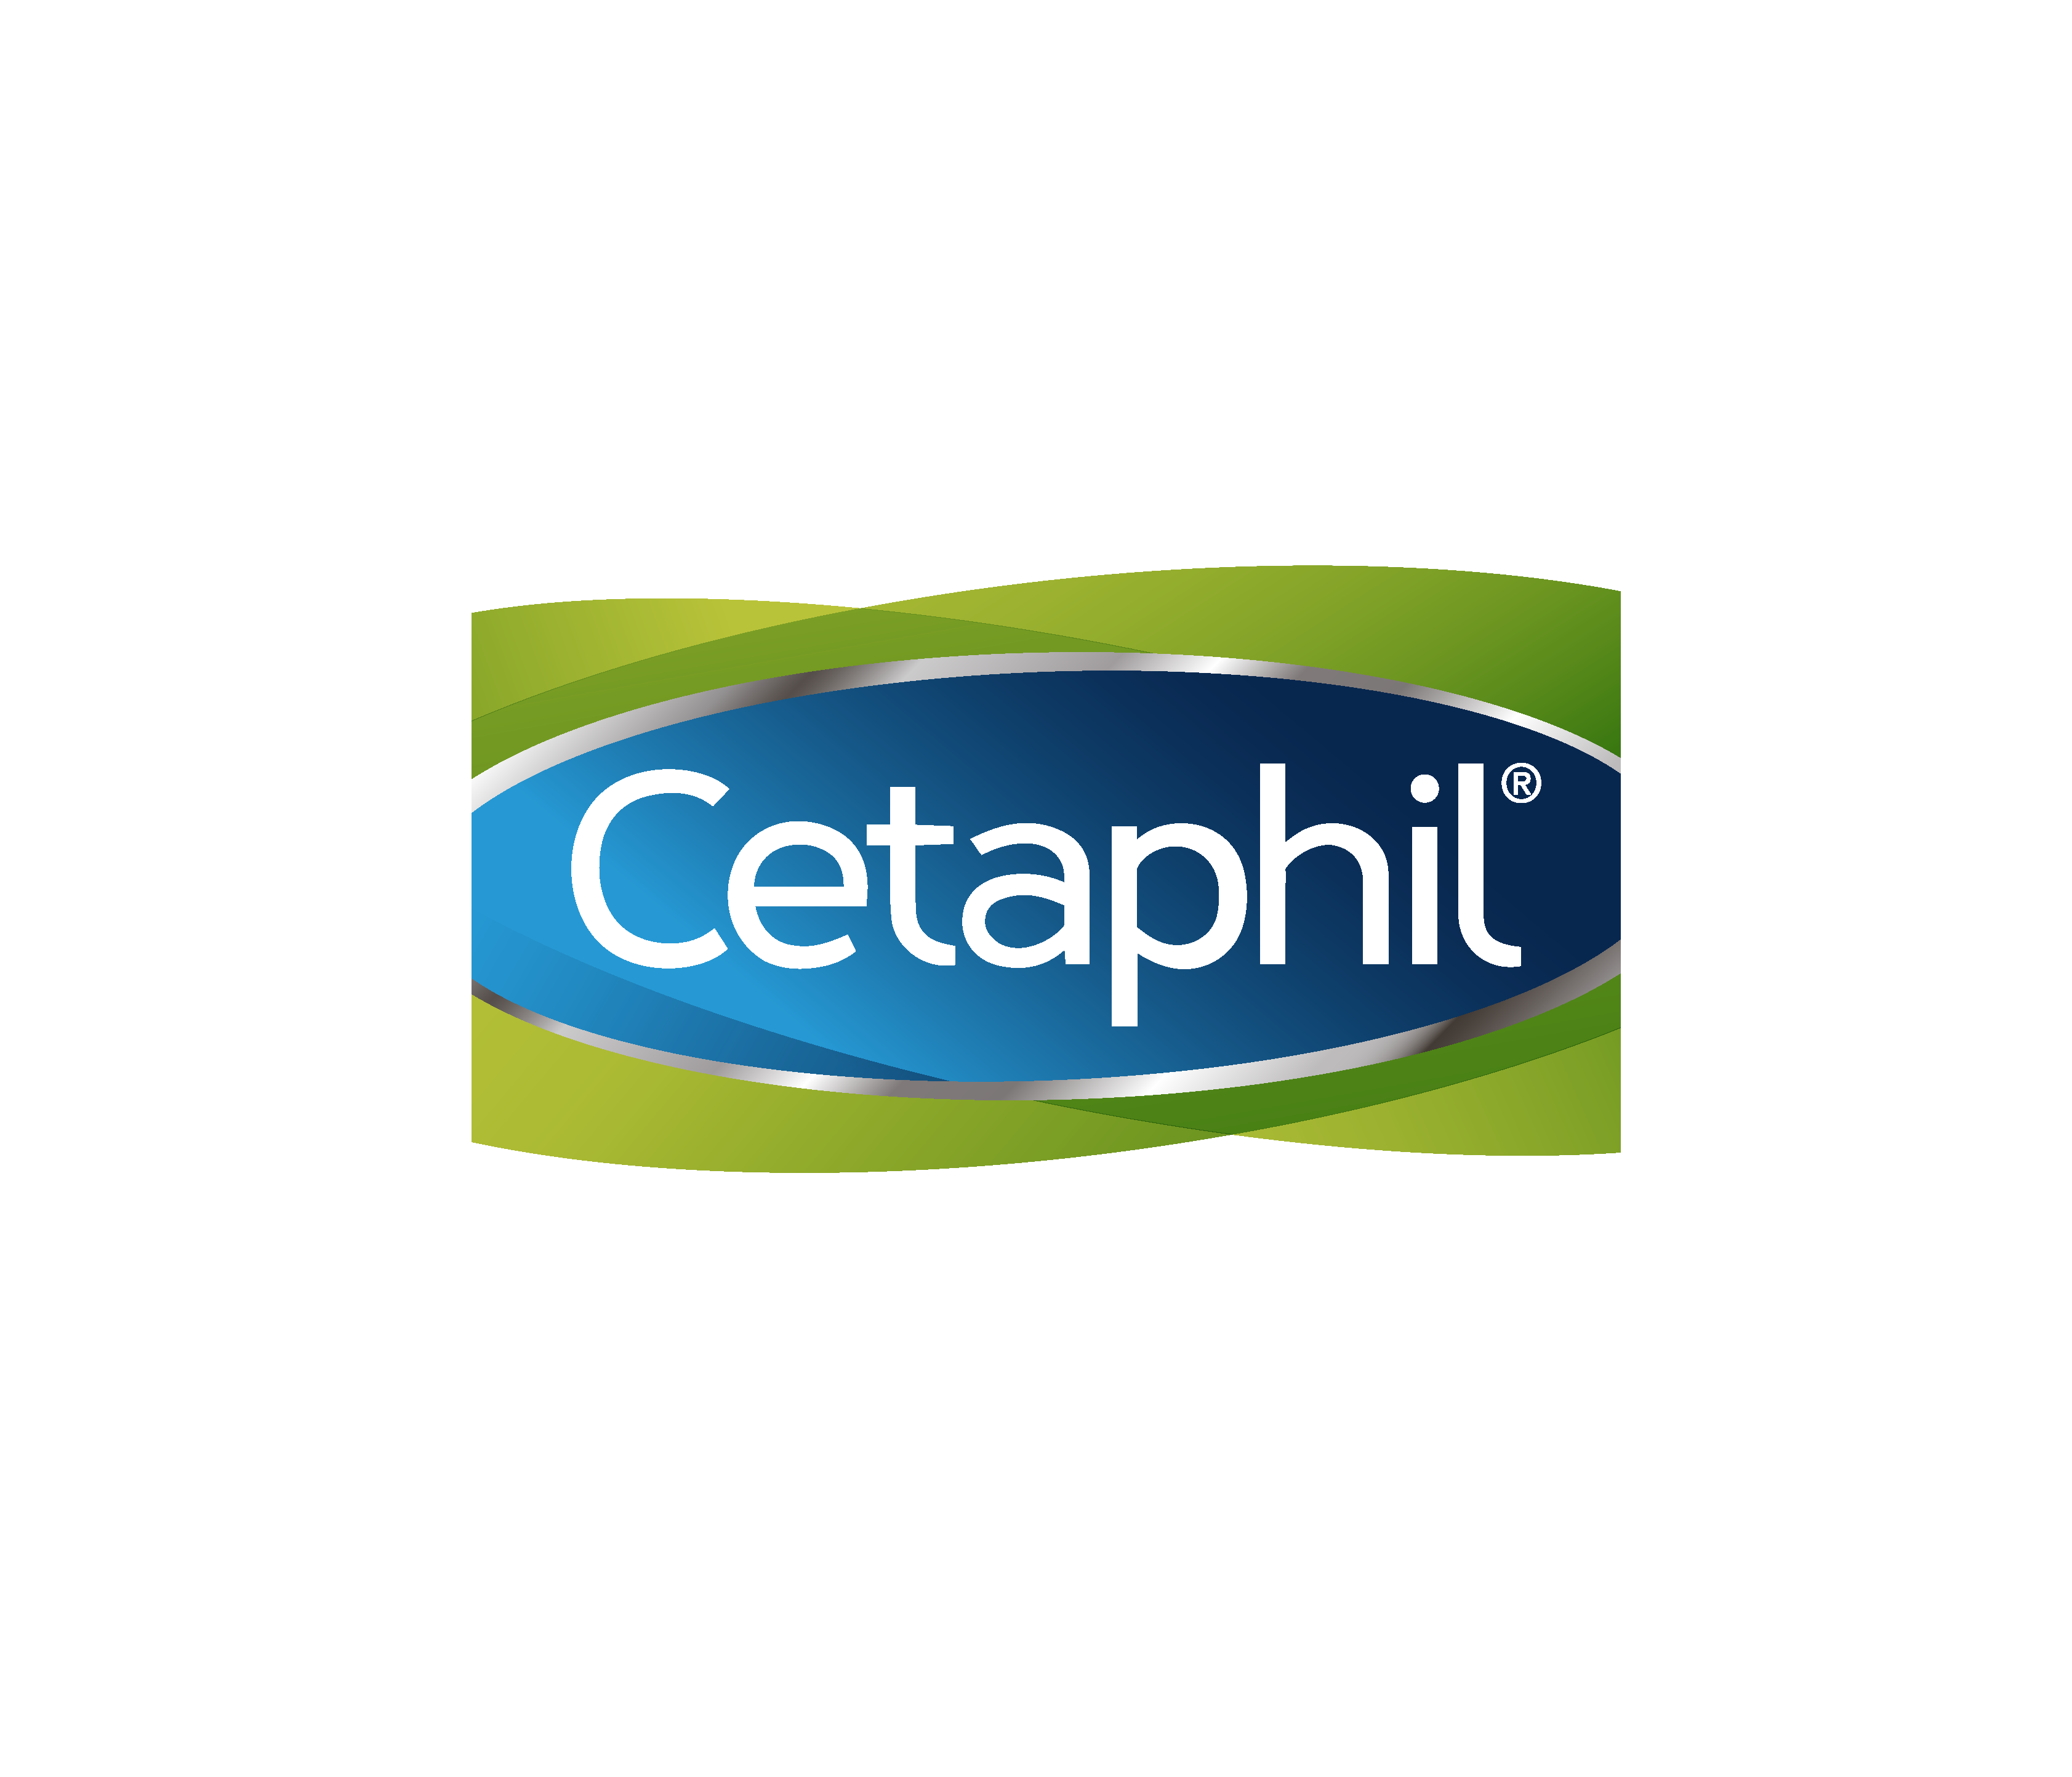 Download Cetaphil Logo PNG and Vector (PDF, SVG, Ai, EPS) Free